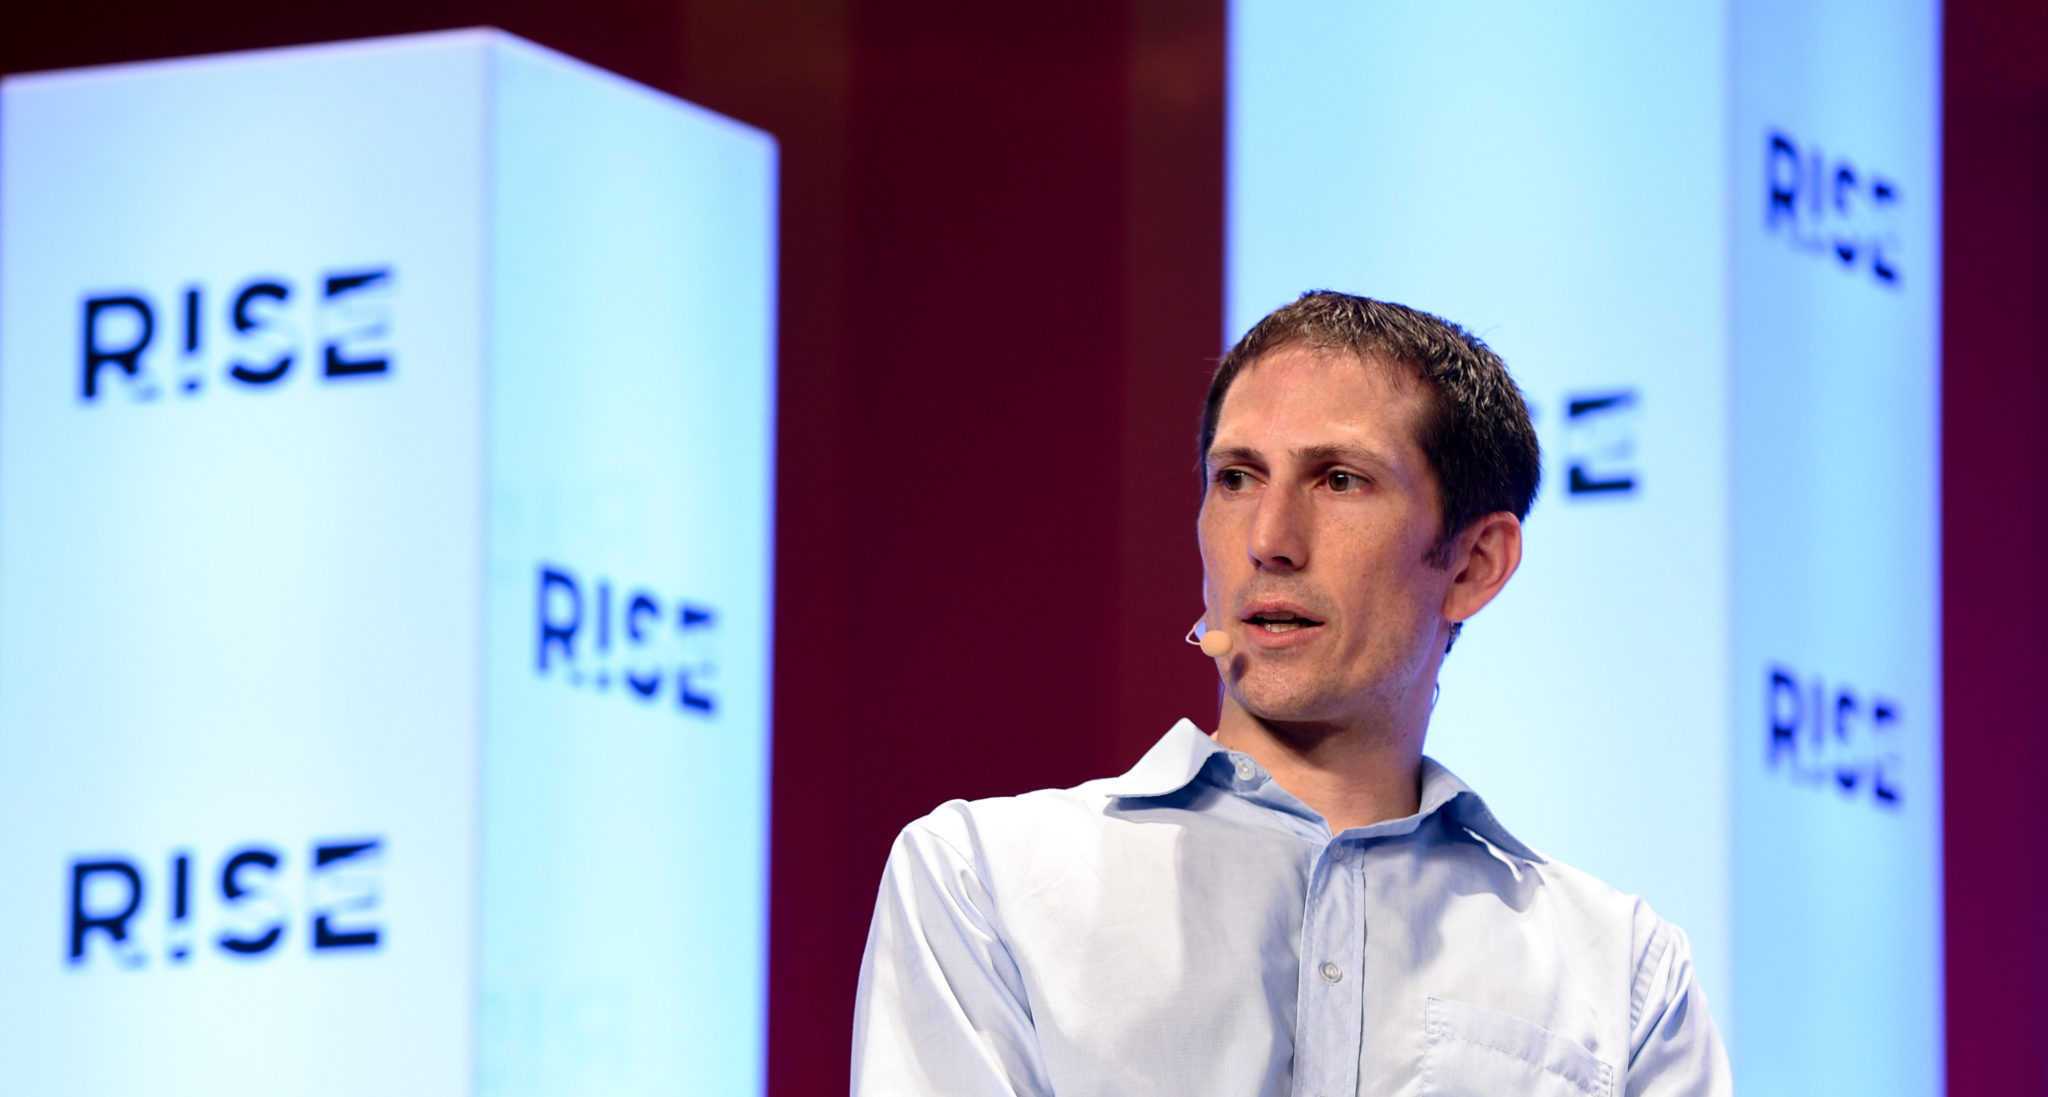 Nick Halla, SVP International, Impossible Foods, on Center Stage at Rise 2019 at the Hong Kong Convention and Exhibition Center